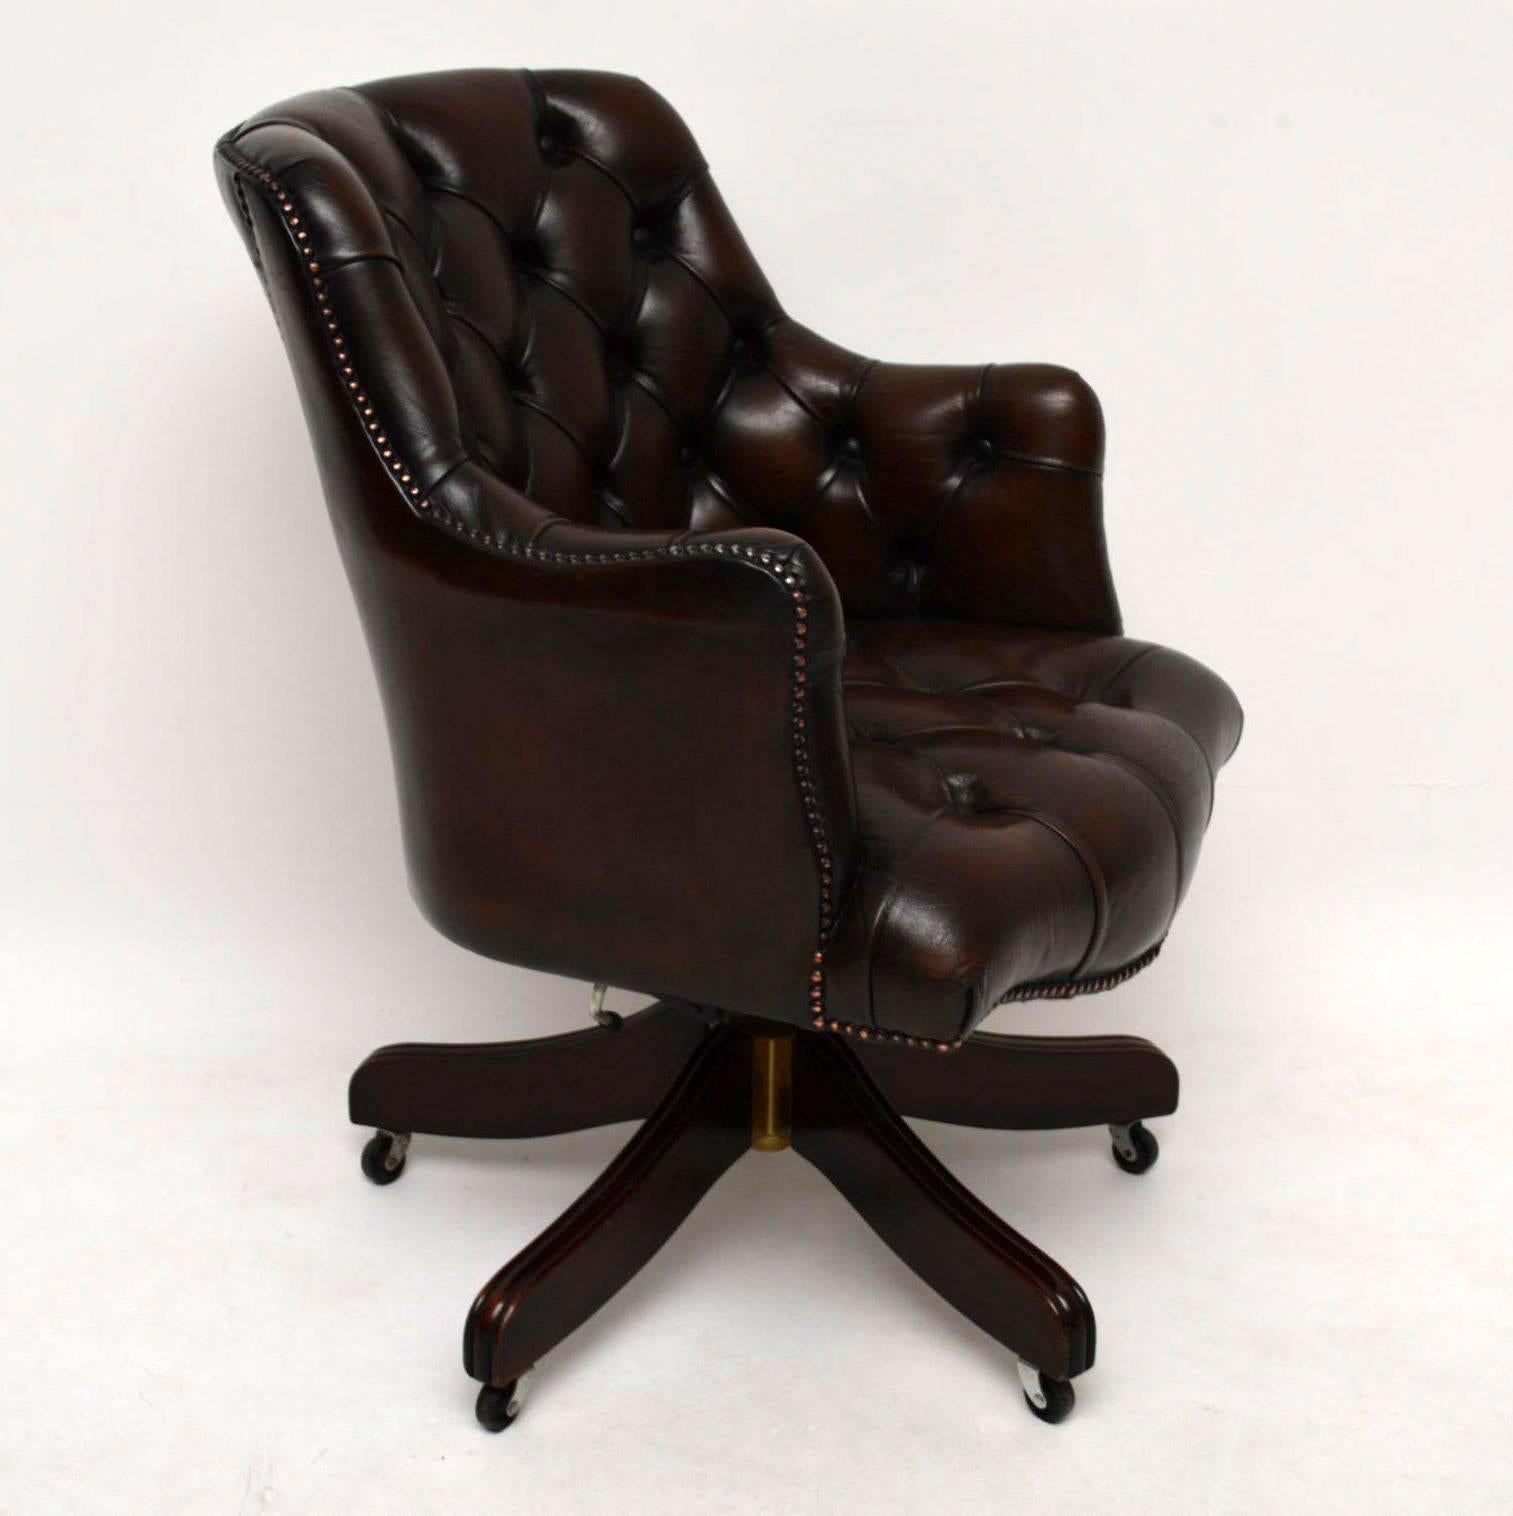 English Antique Deep Buttoned Leather Swivel Desk Chair